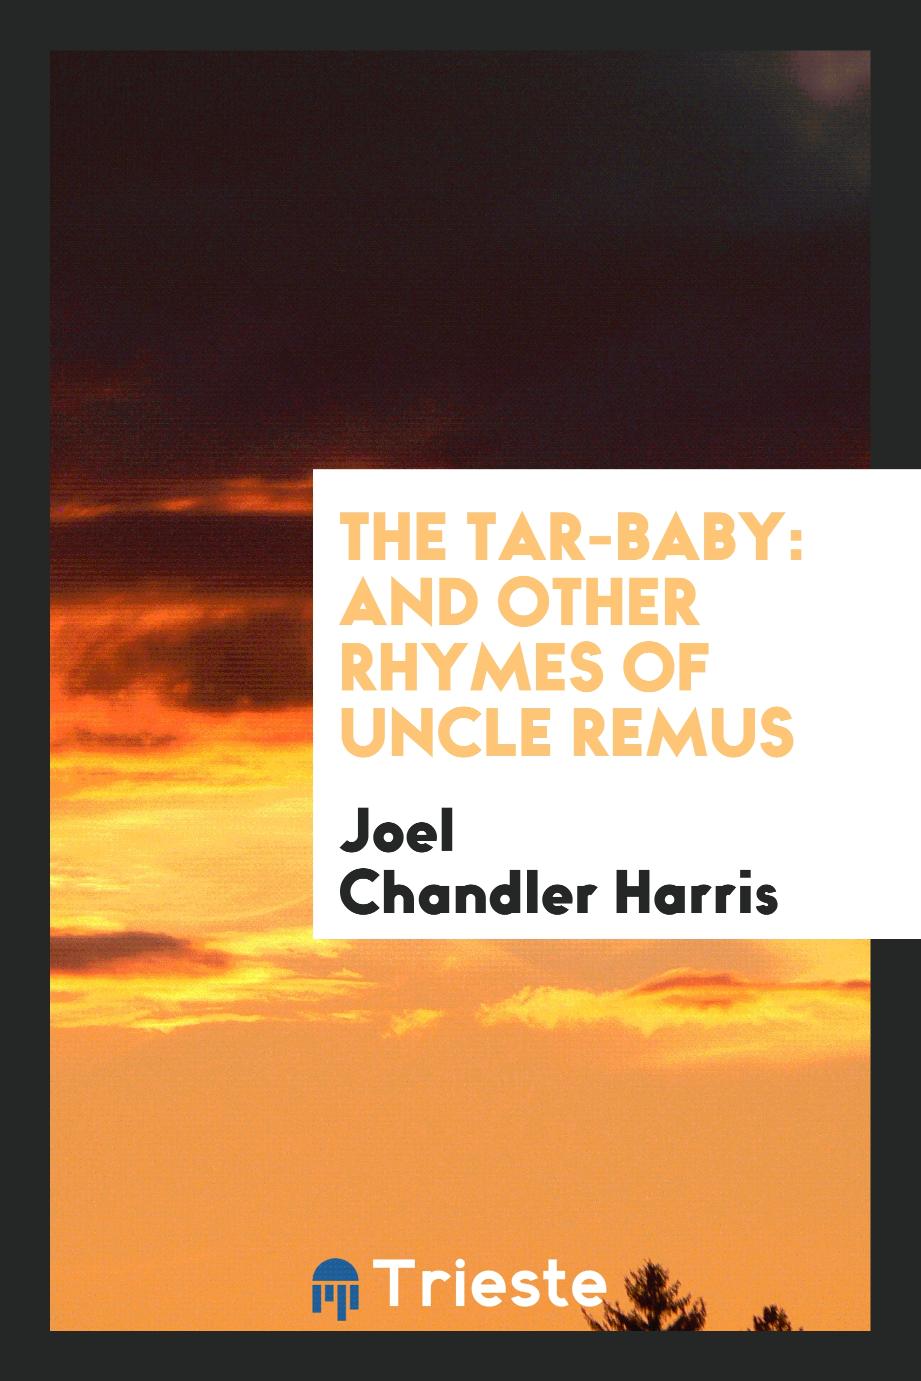 The Tar-Baby: And Other Rhymes of Uncle Remus